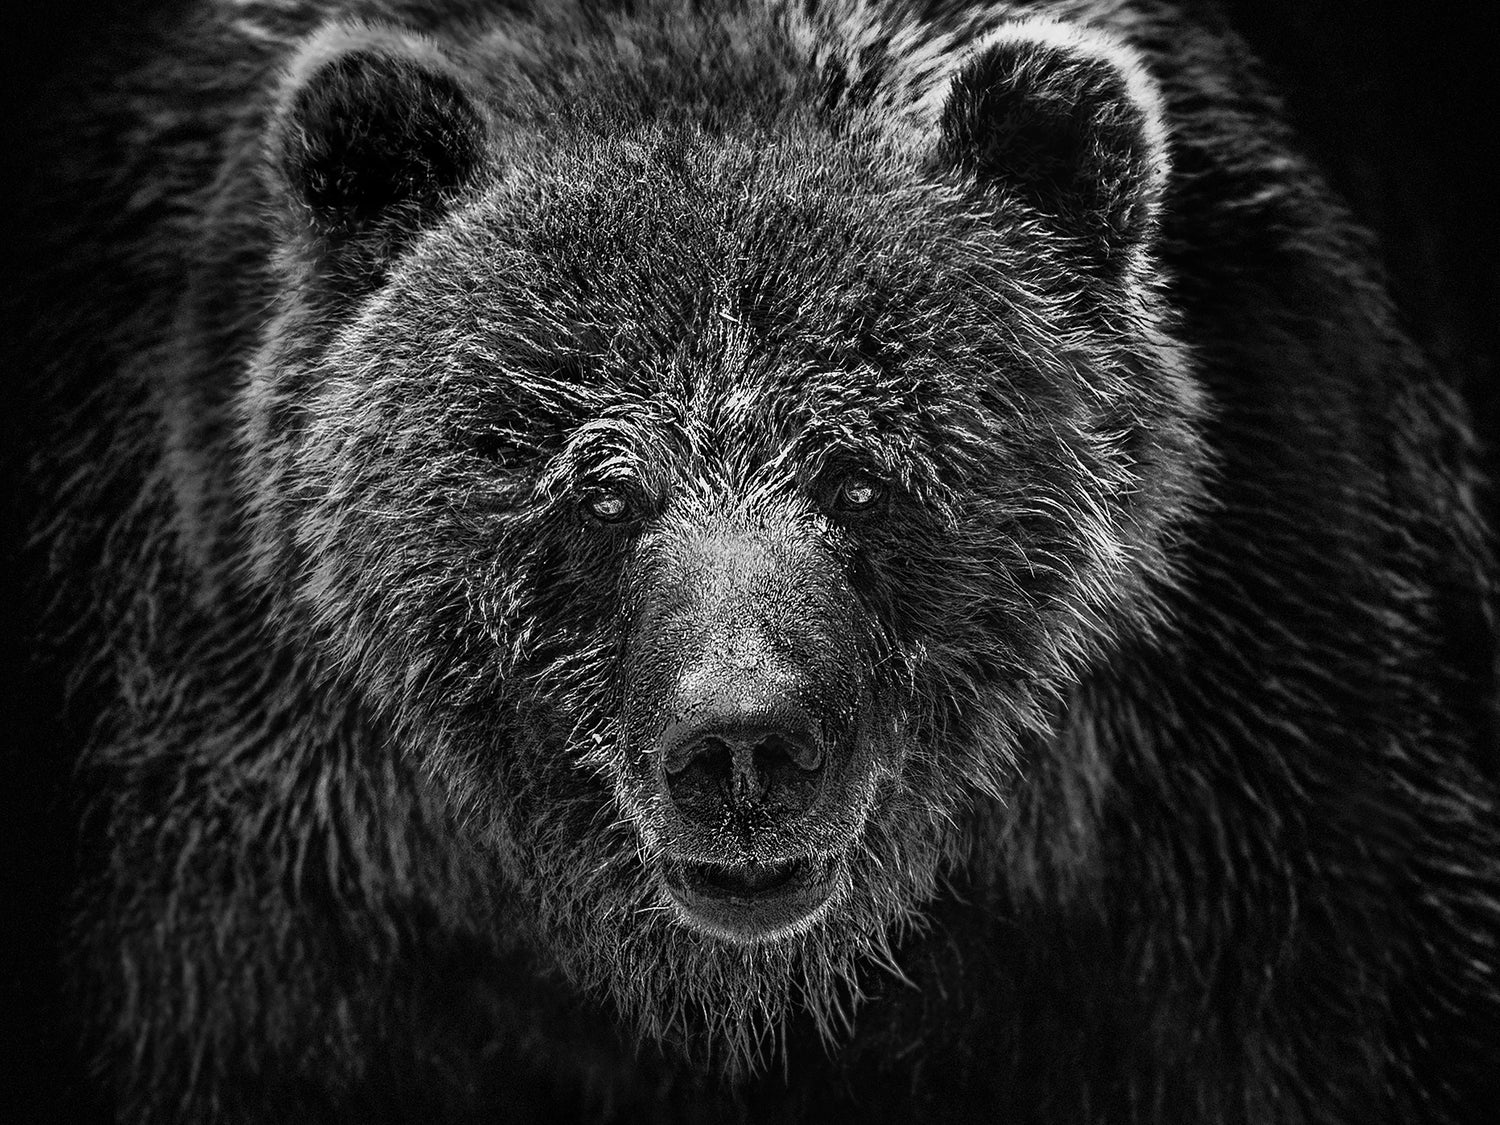 Shane Russeck - "Grizzly Portrait" 12x12 - Black and White Photography of a  Grizzly Bear For Sale at 1stDibs